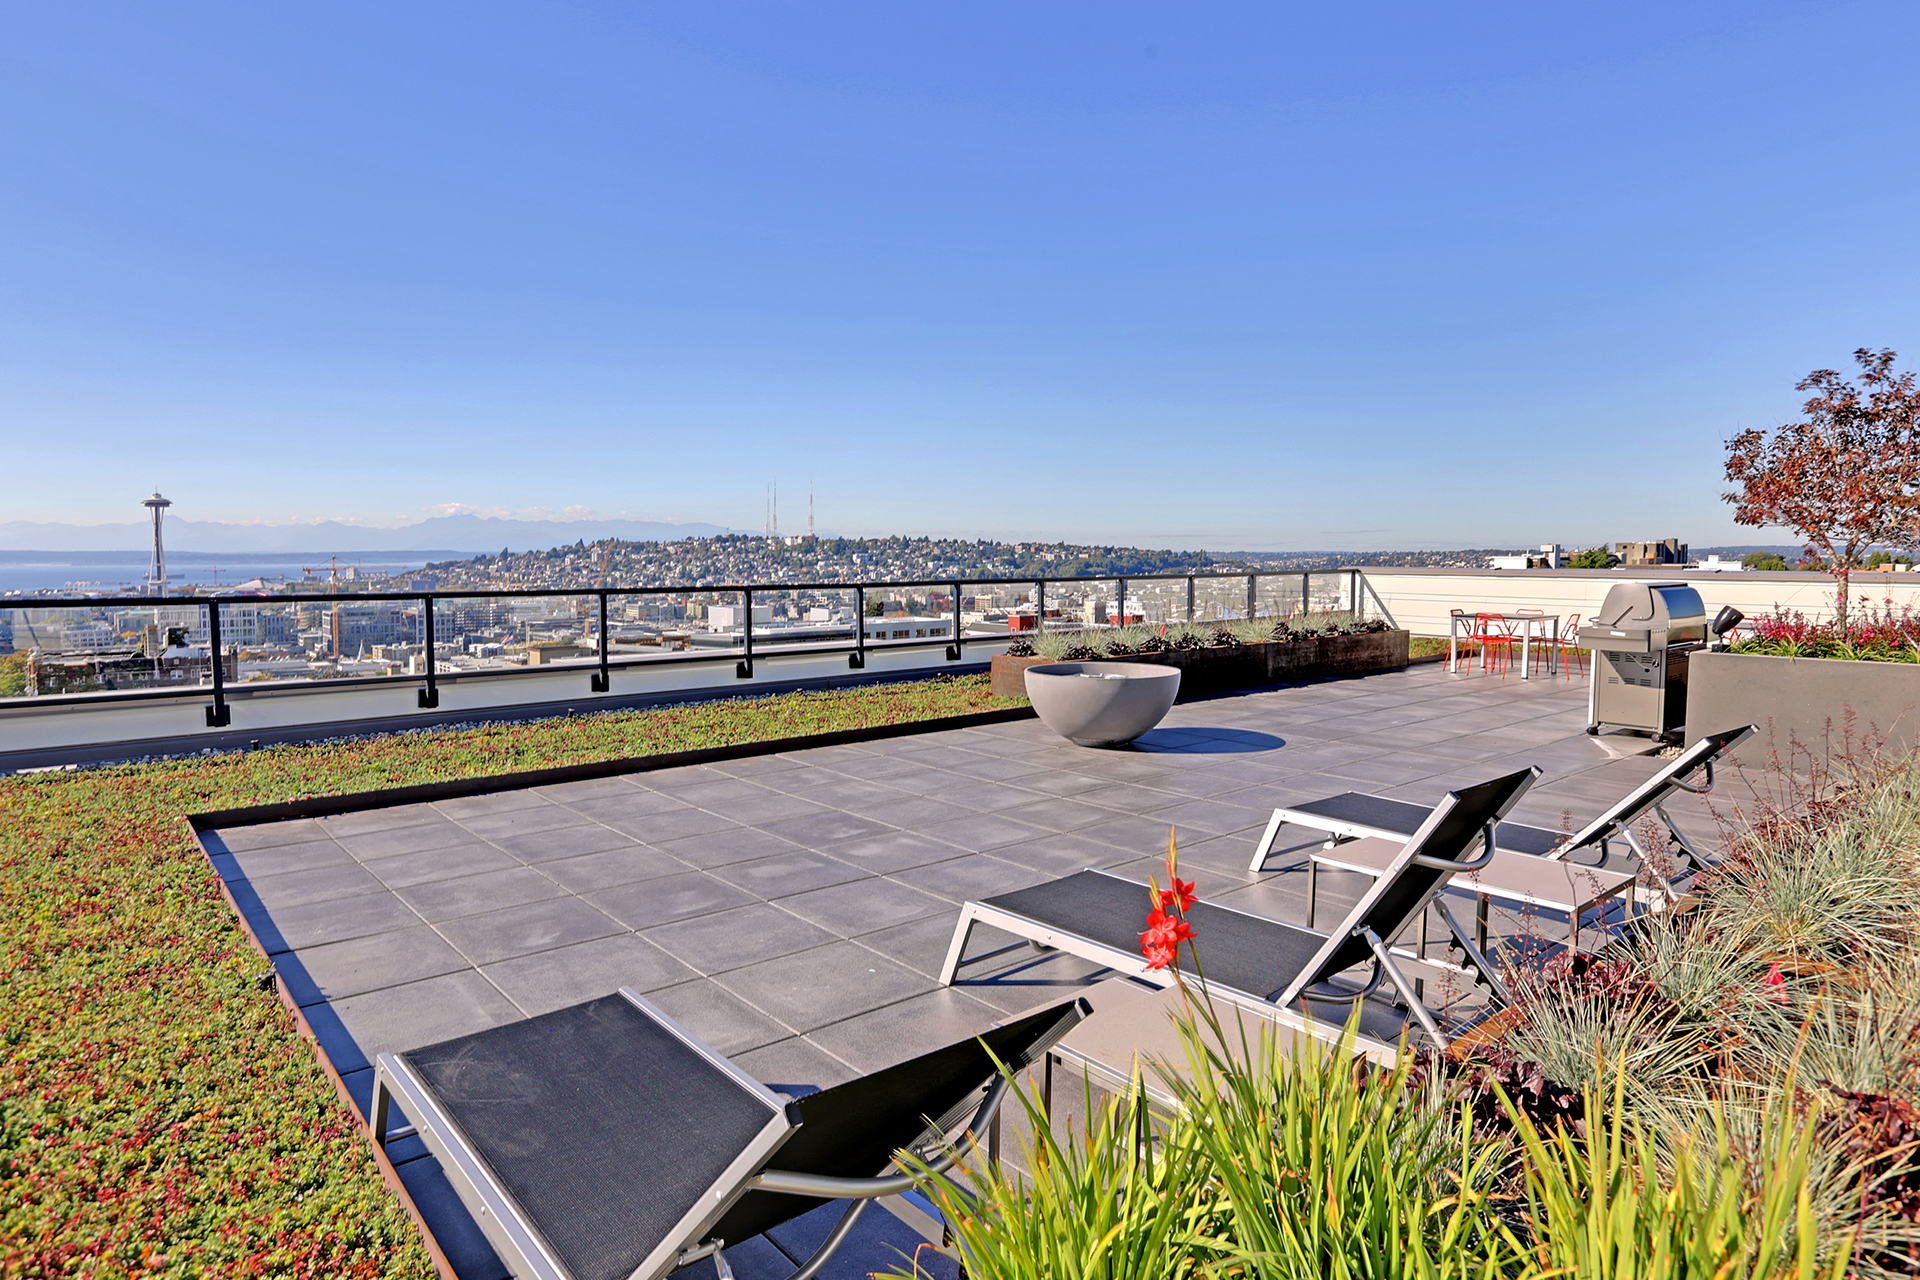 The view from the neatly manicured top of the Lexicon Apartments building has a view of Seattle on a sunny day, including mountains and the Space Needle.